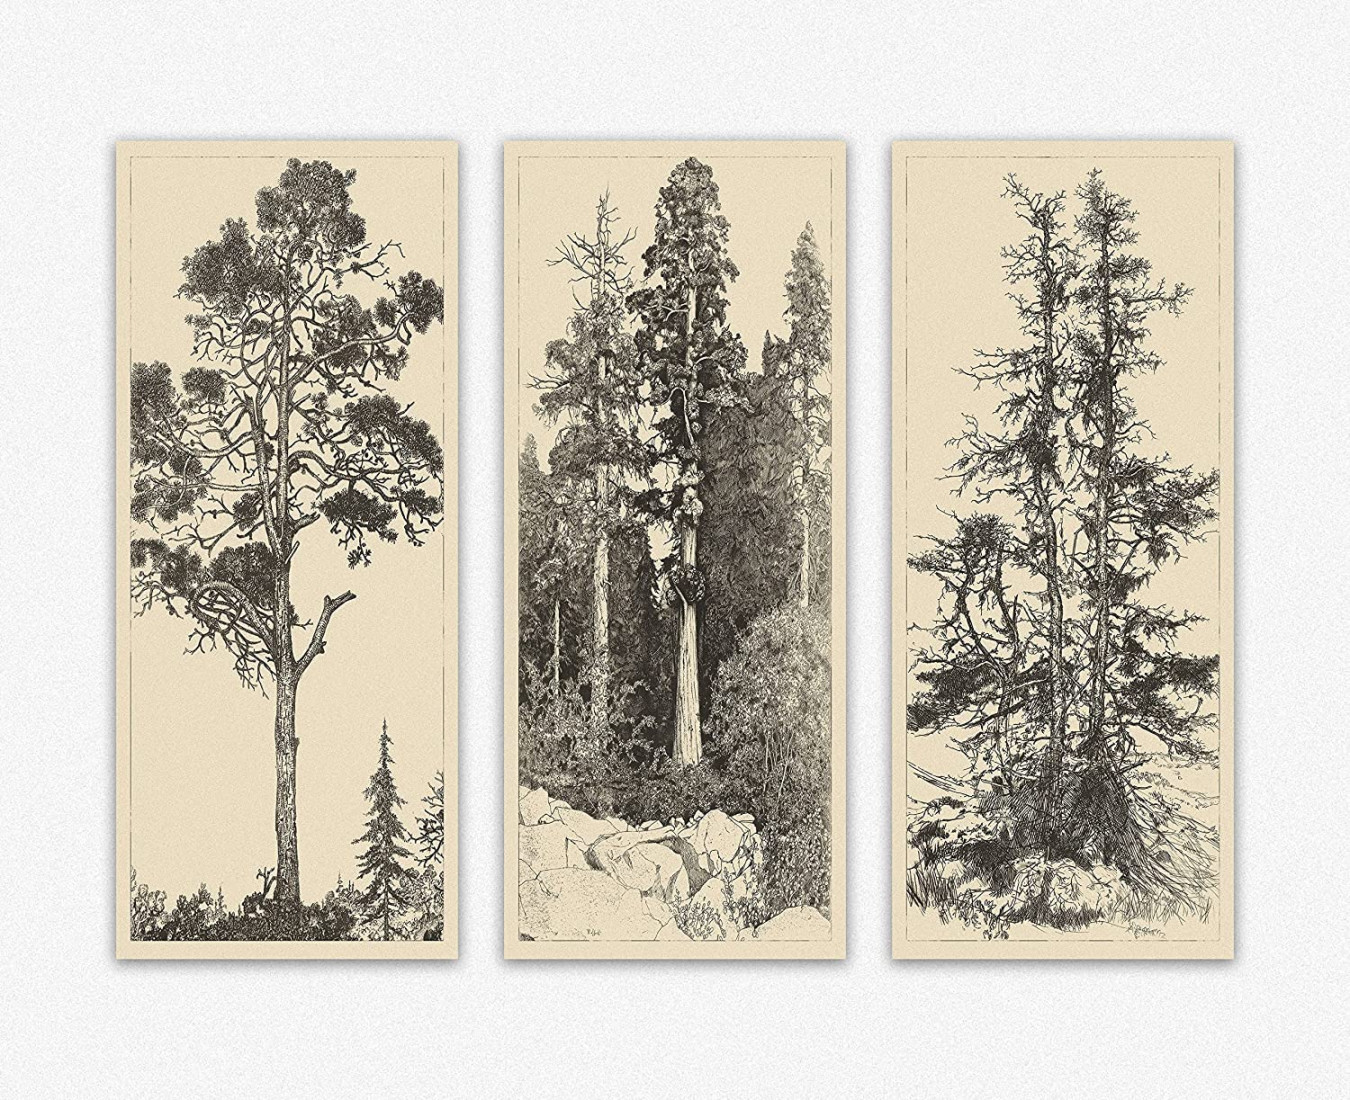 Educational Vintage Trees Posters for Room Aesthetic - Vintage Line  Drawings of Trees Set of  Wall Art Decor (. x